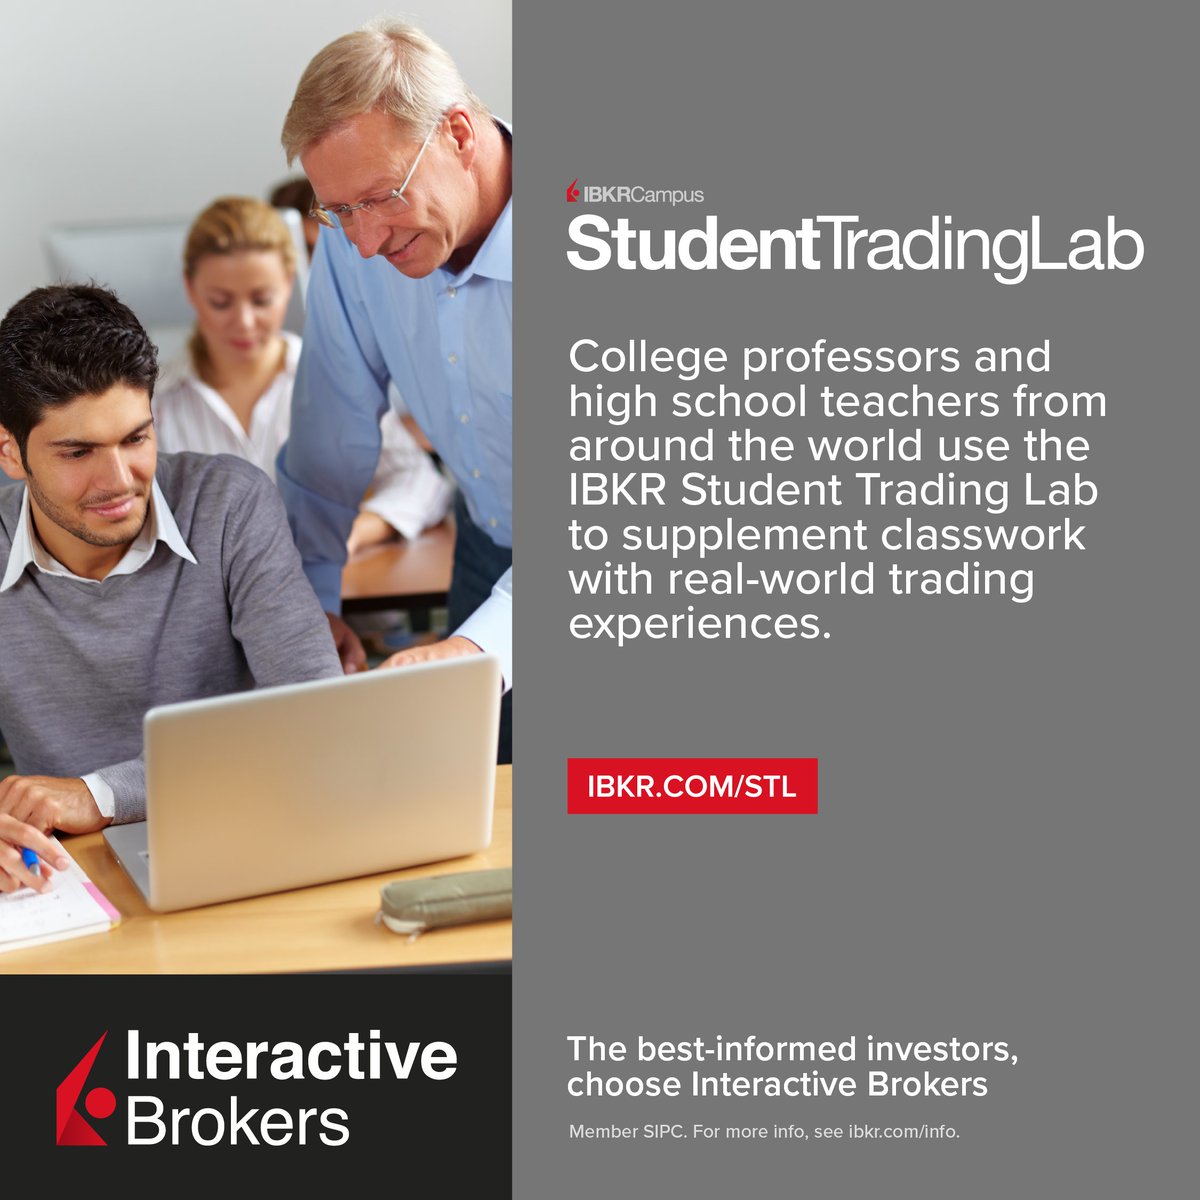 Looking for an innovative way to teach #finance? #IBKR's Student Trading Lab offers cutting-edge resources for #educators to enrich their curriculum with practical #trading experience: spr.ly/stlhomet